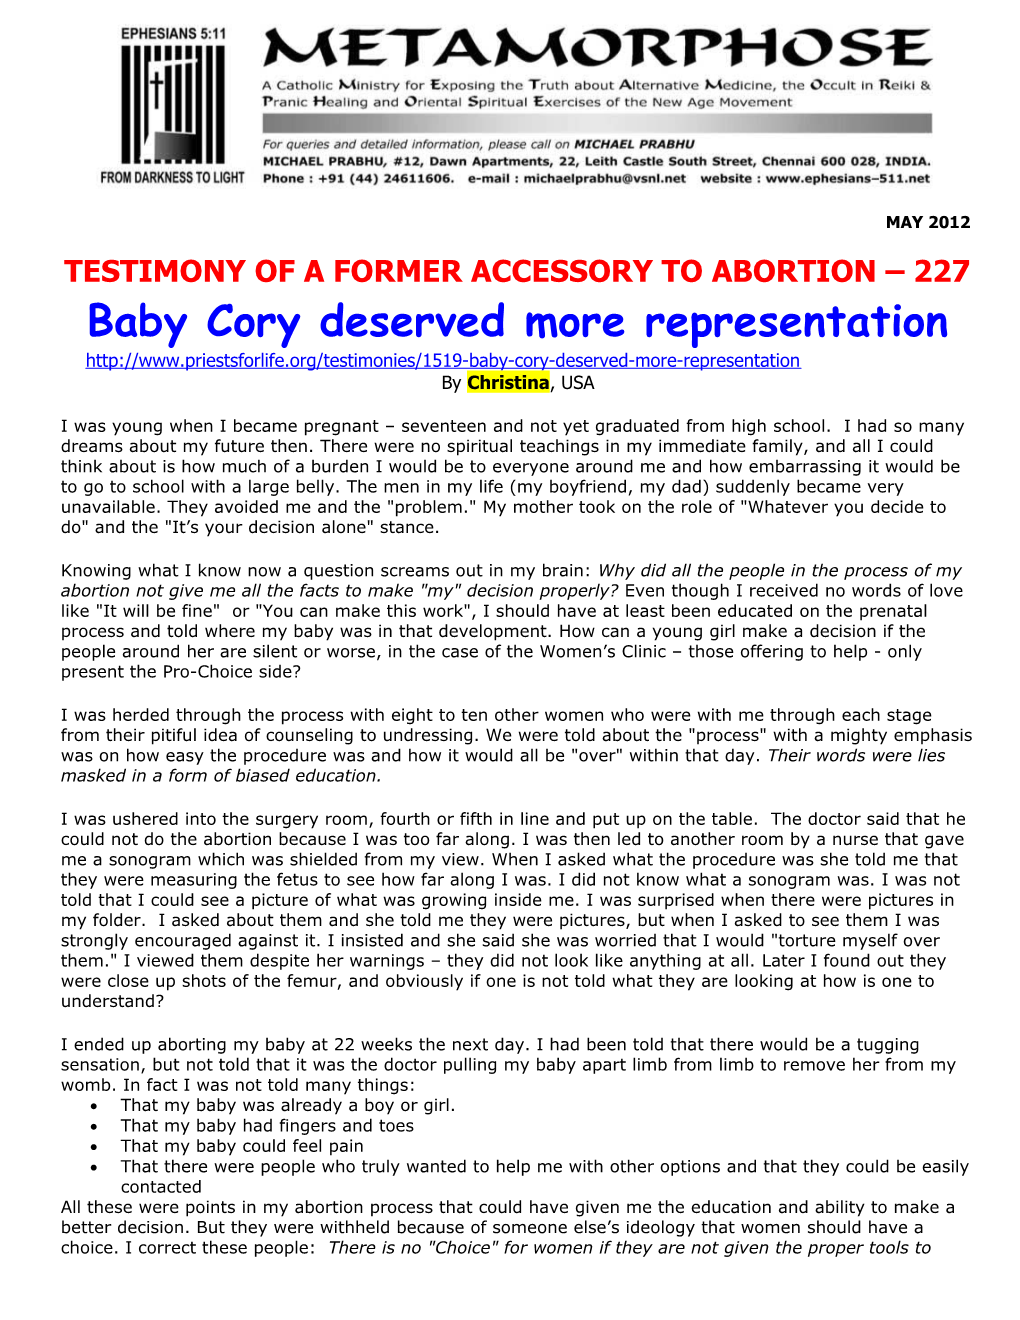 Testimony of a Former Accessory to Abortion 227